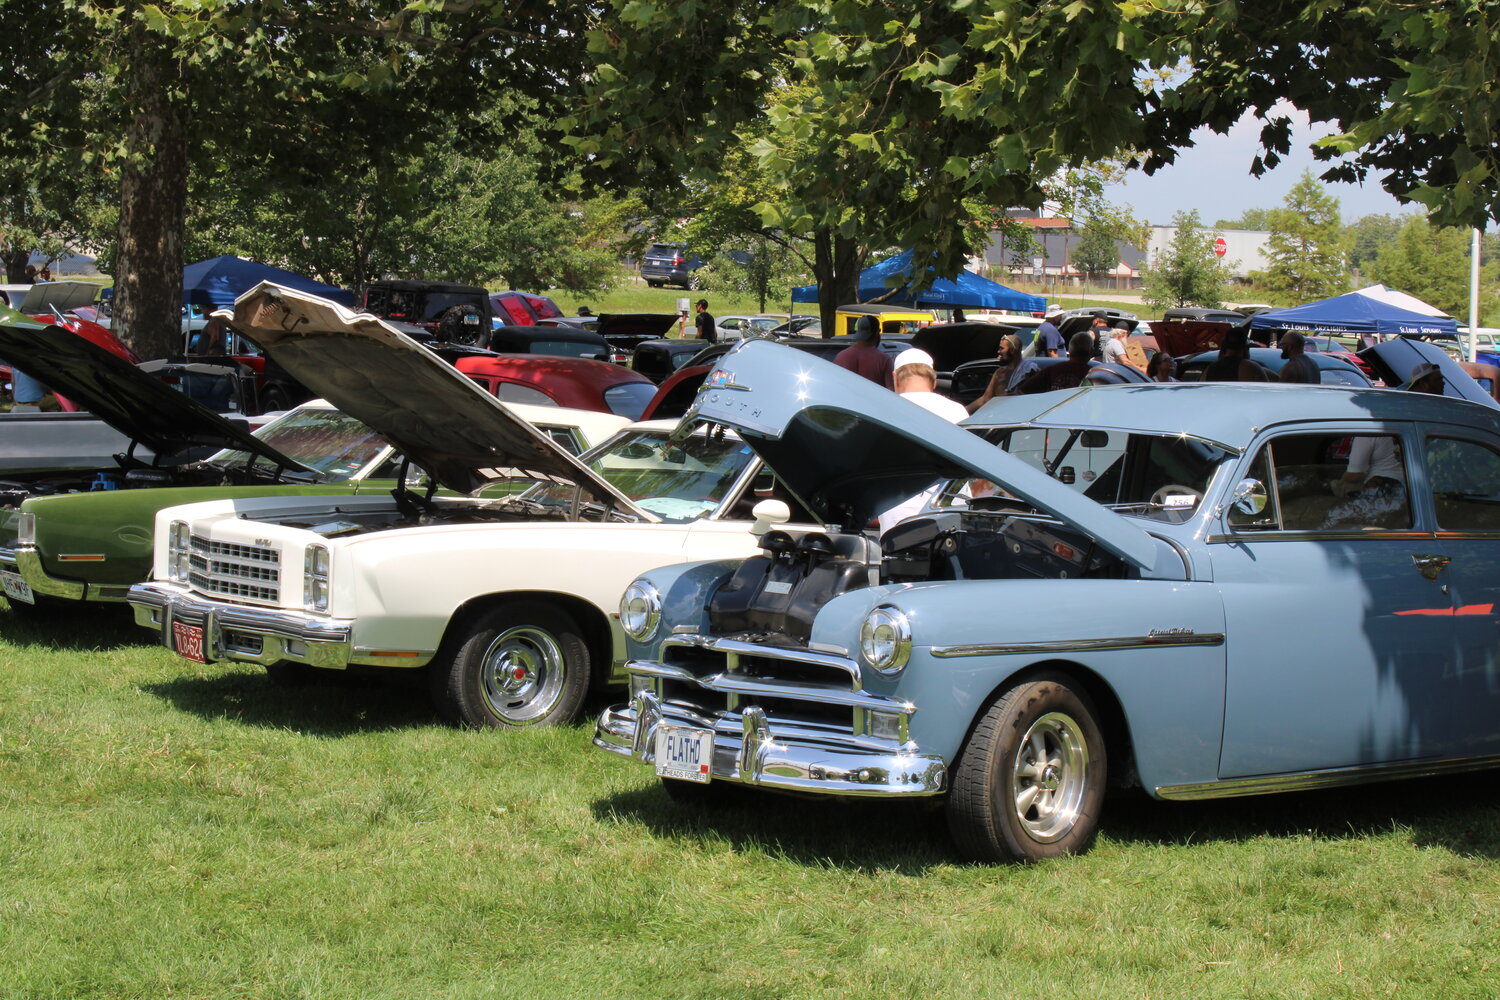 These two cars were among many that were on display in Wright City on July 29.